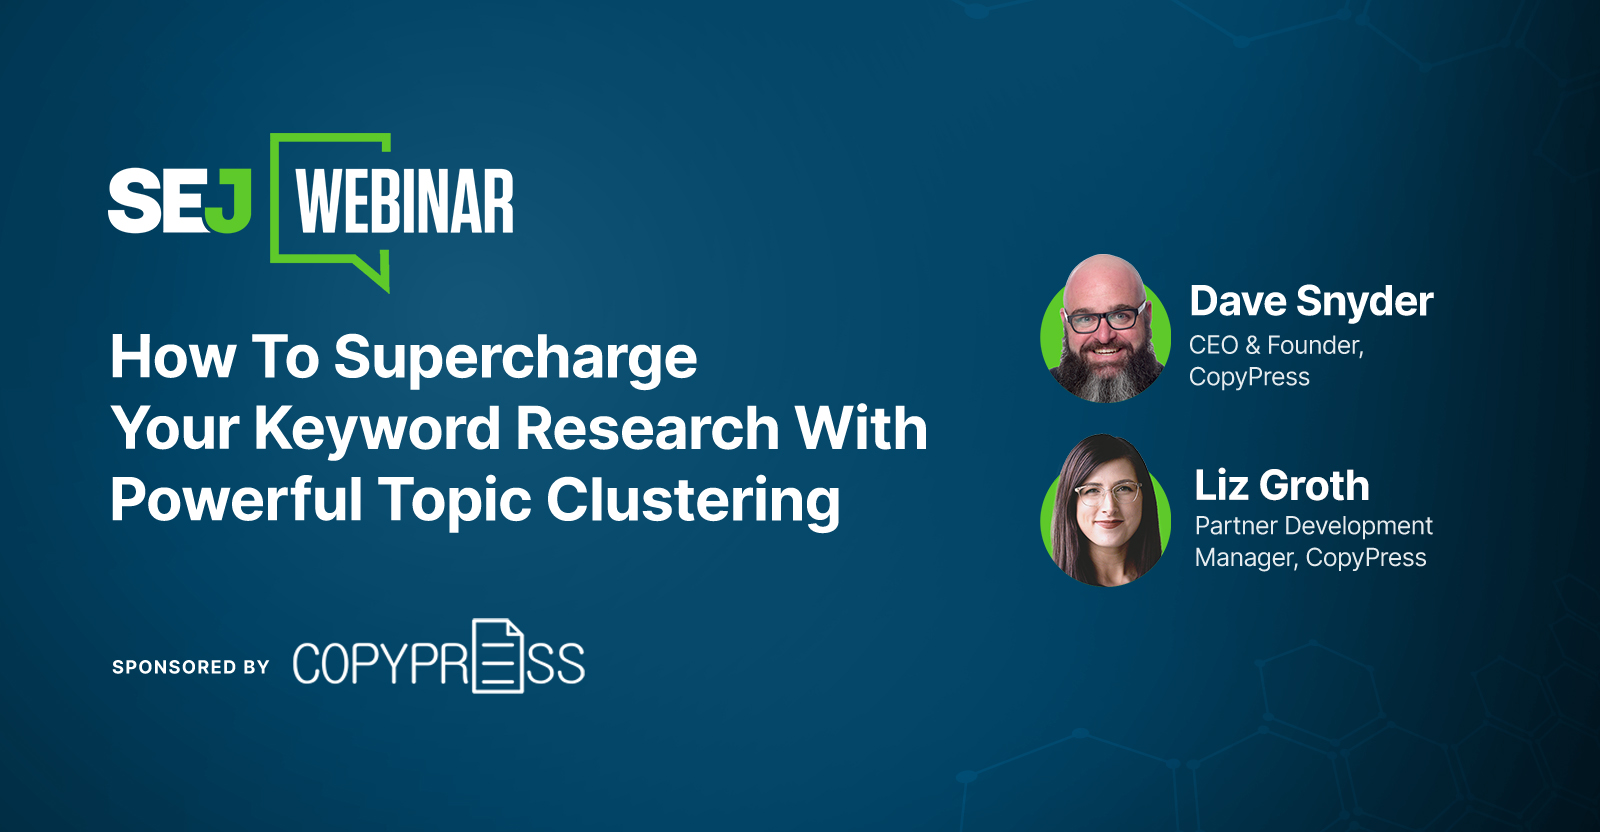 How To Supercharge Your Keyword Research With Powerful Topic Clustering